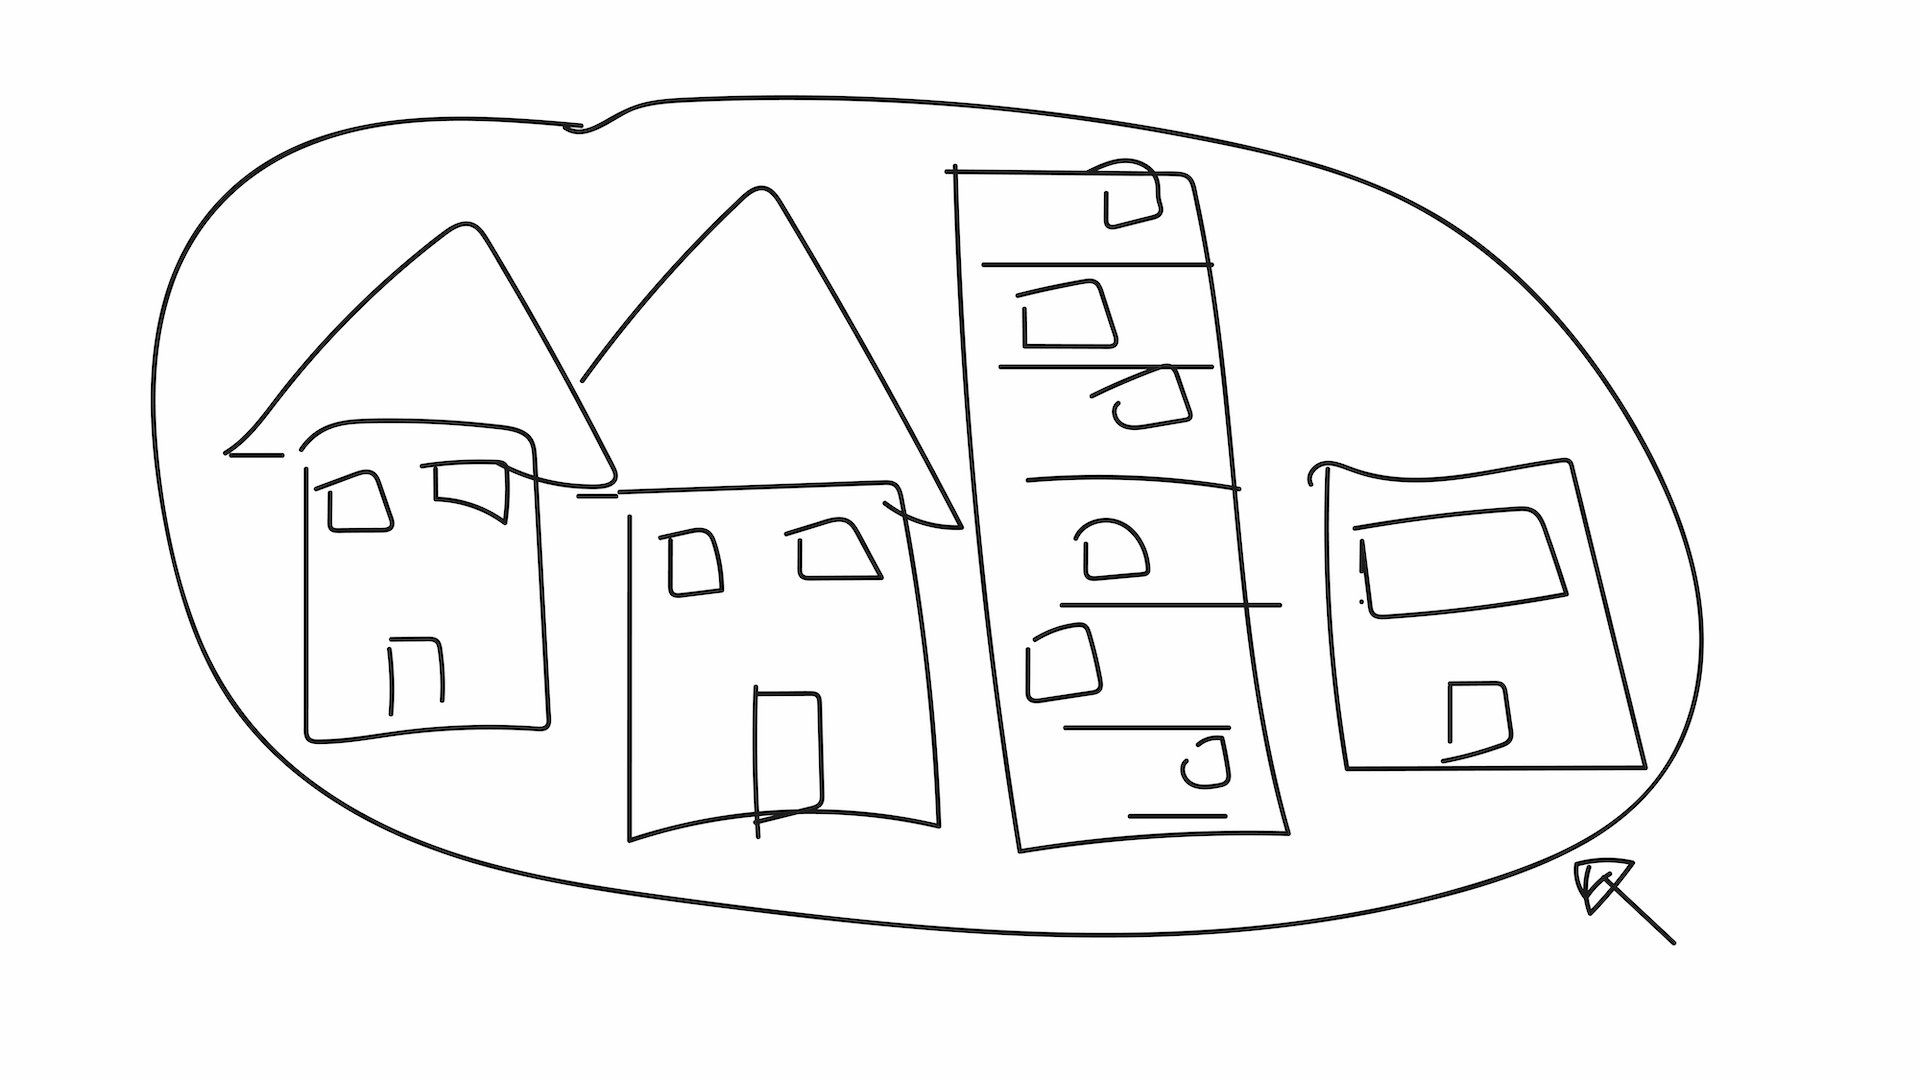 Some houses